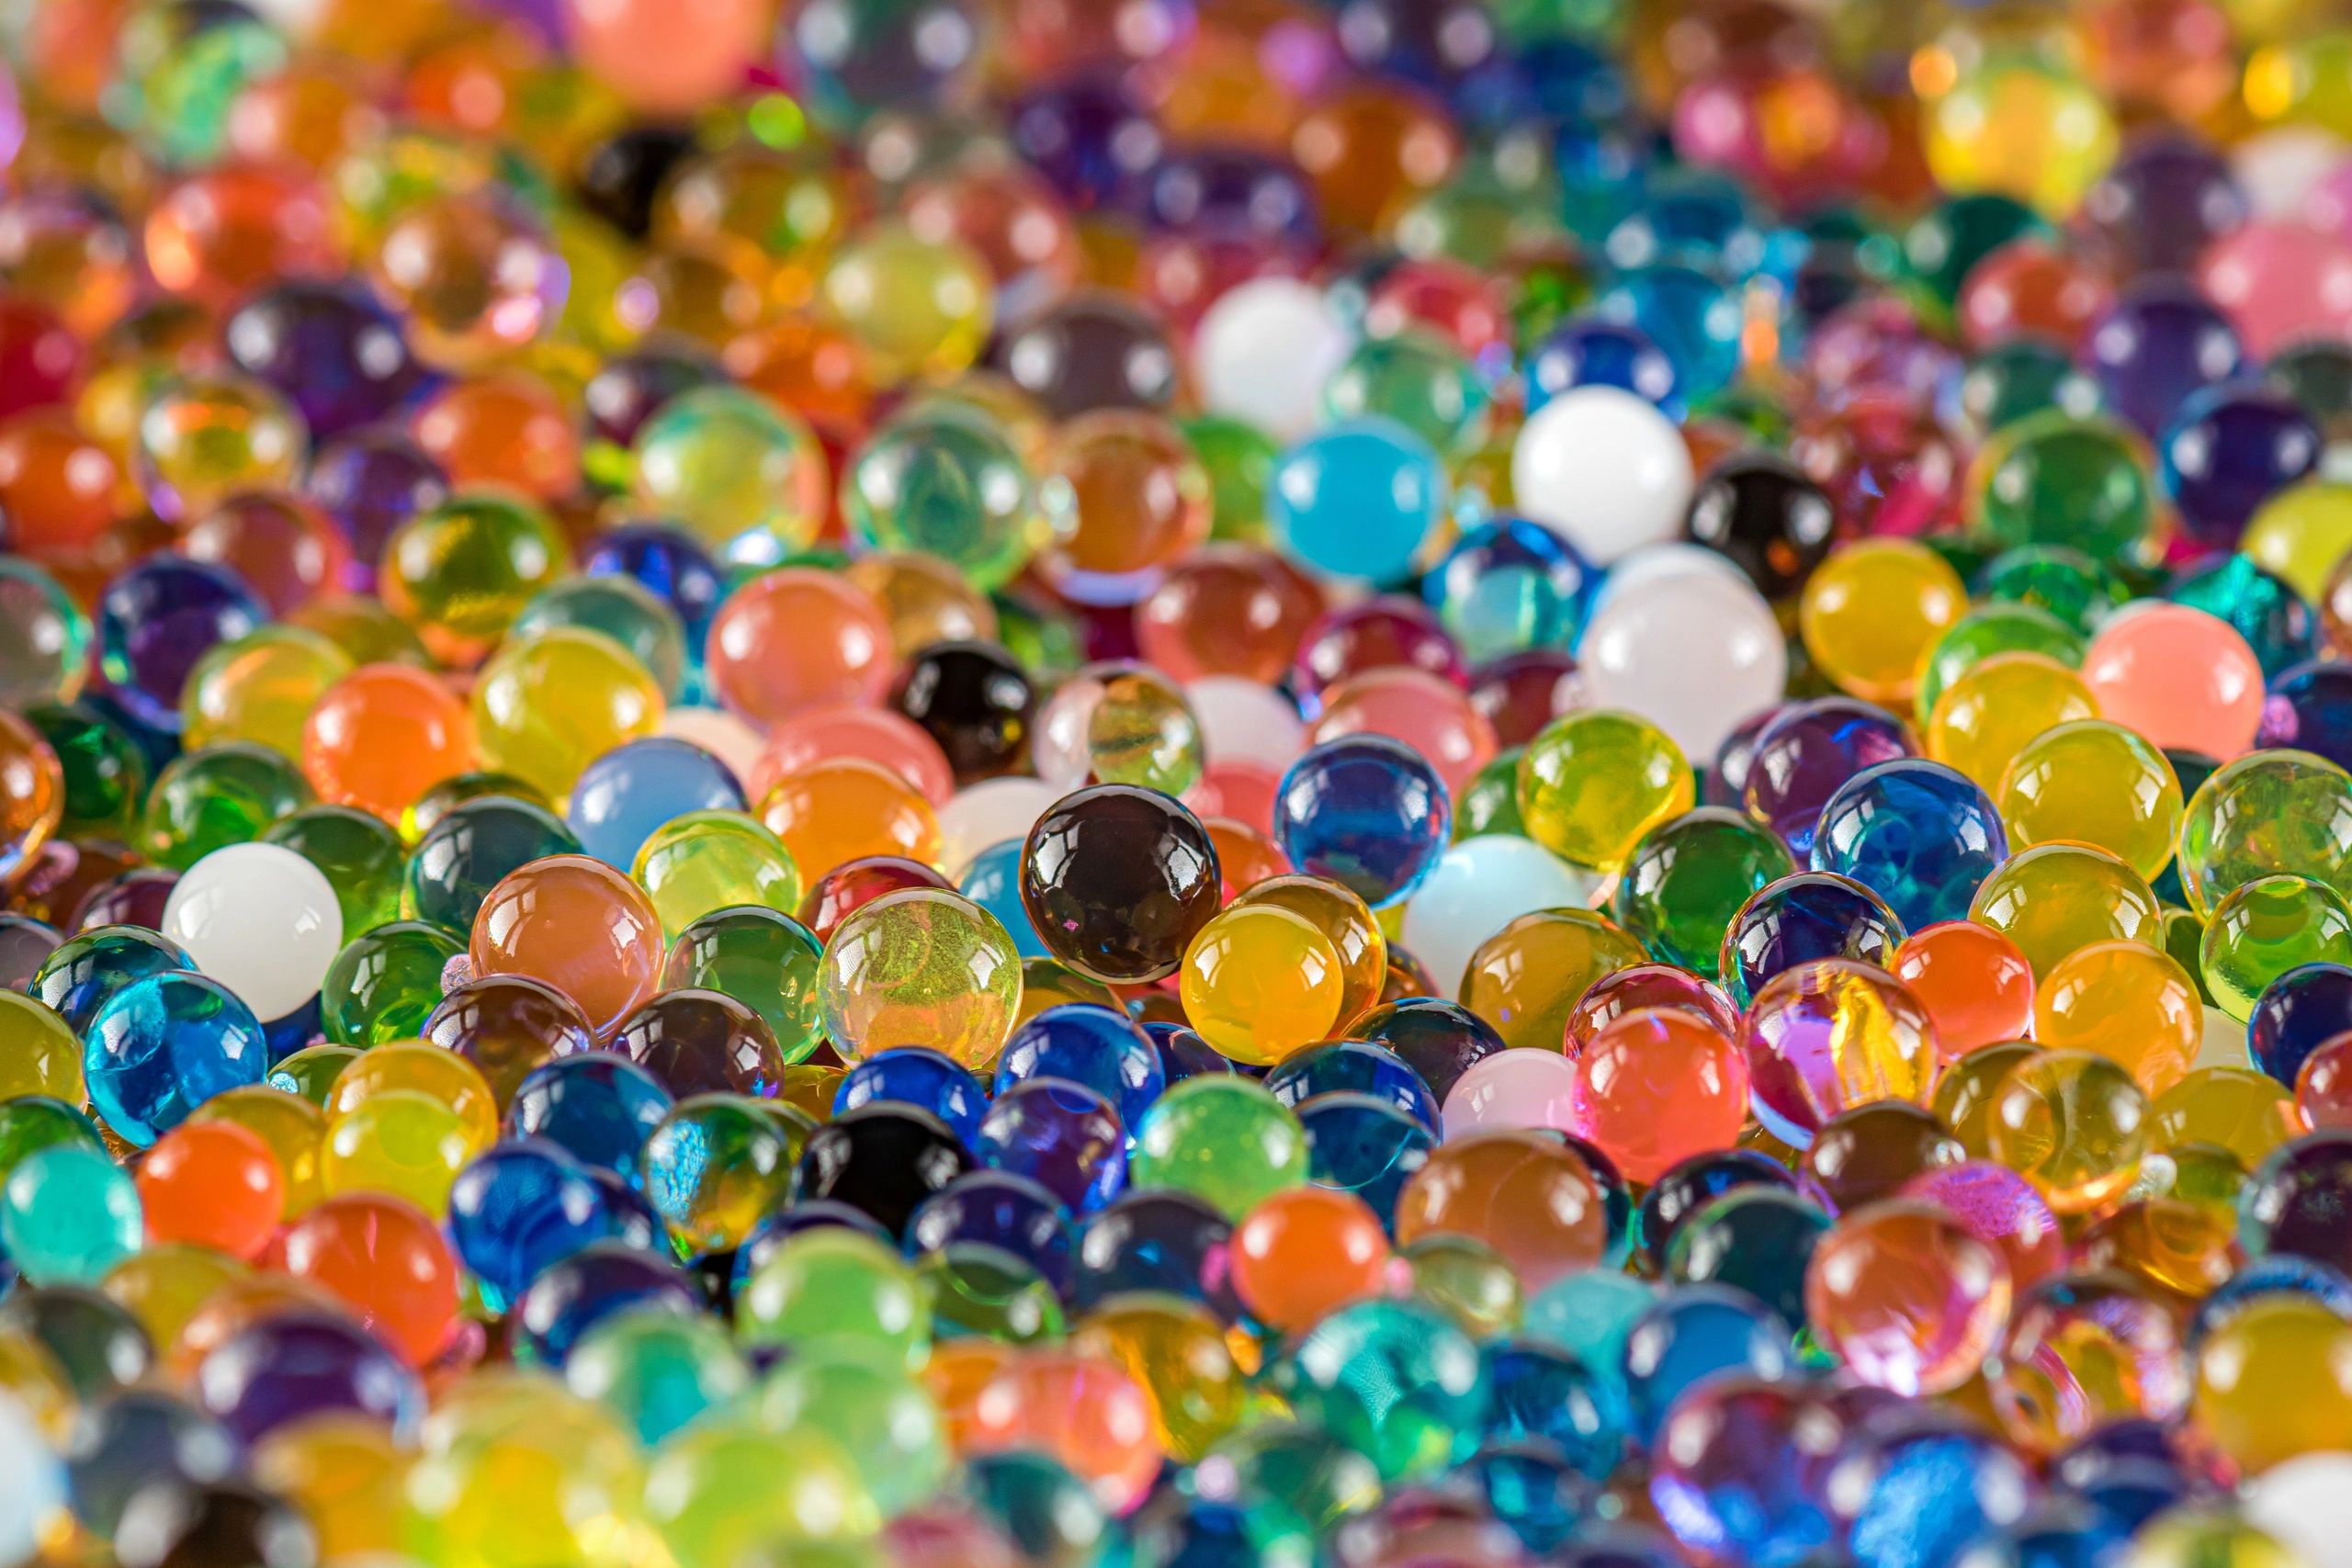 Consumer Reports: Water beads are a toxic toy